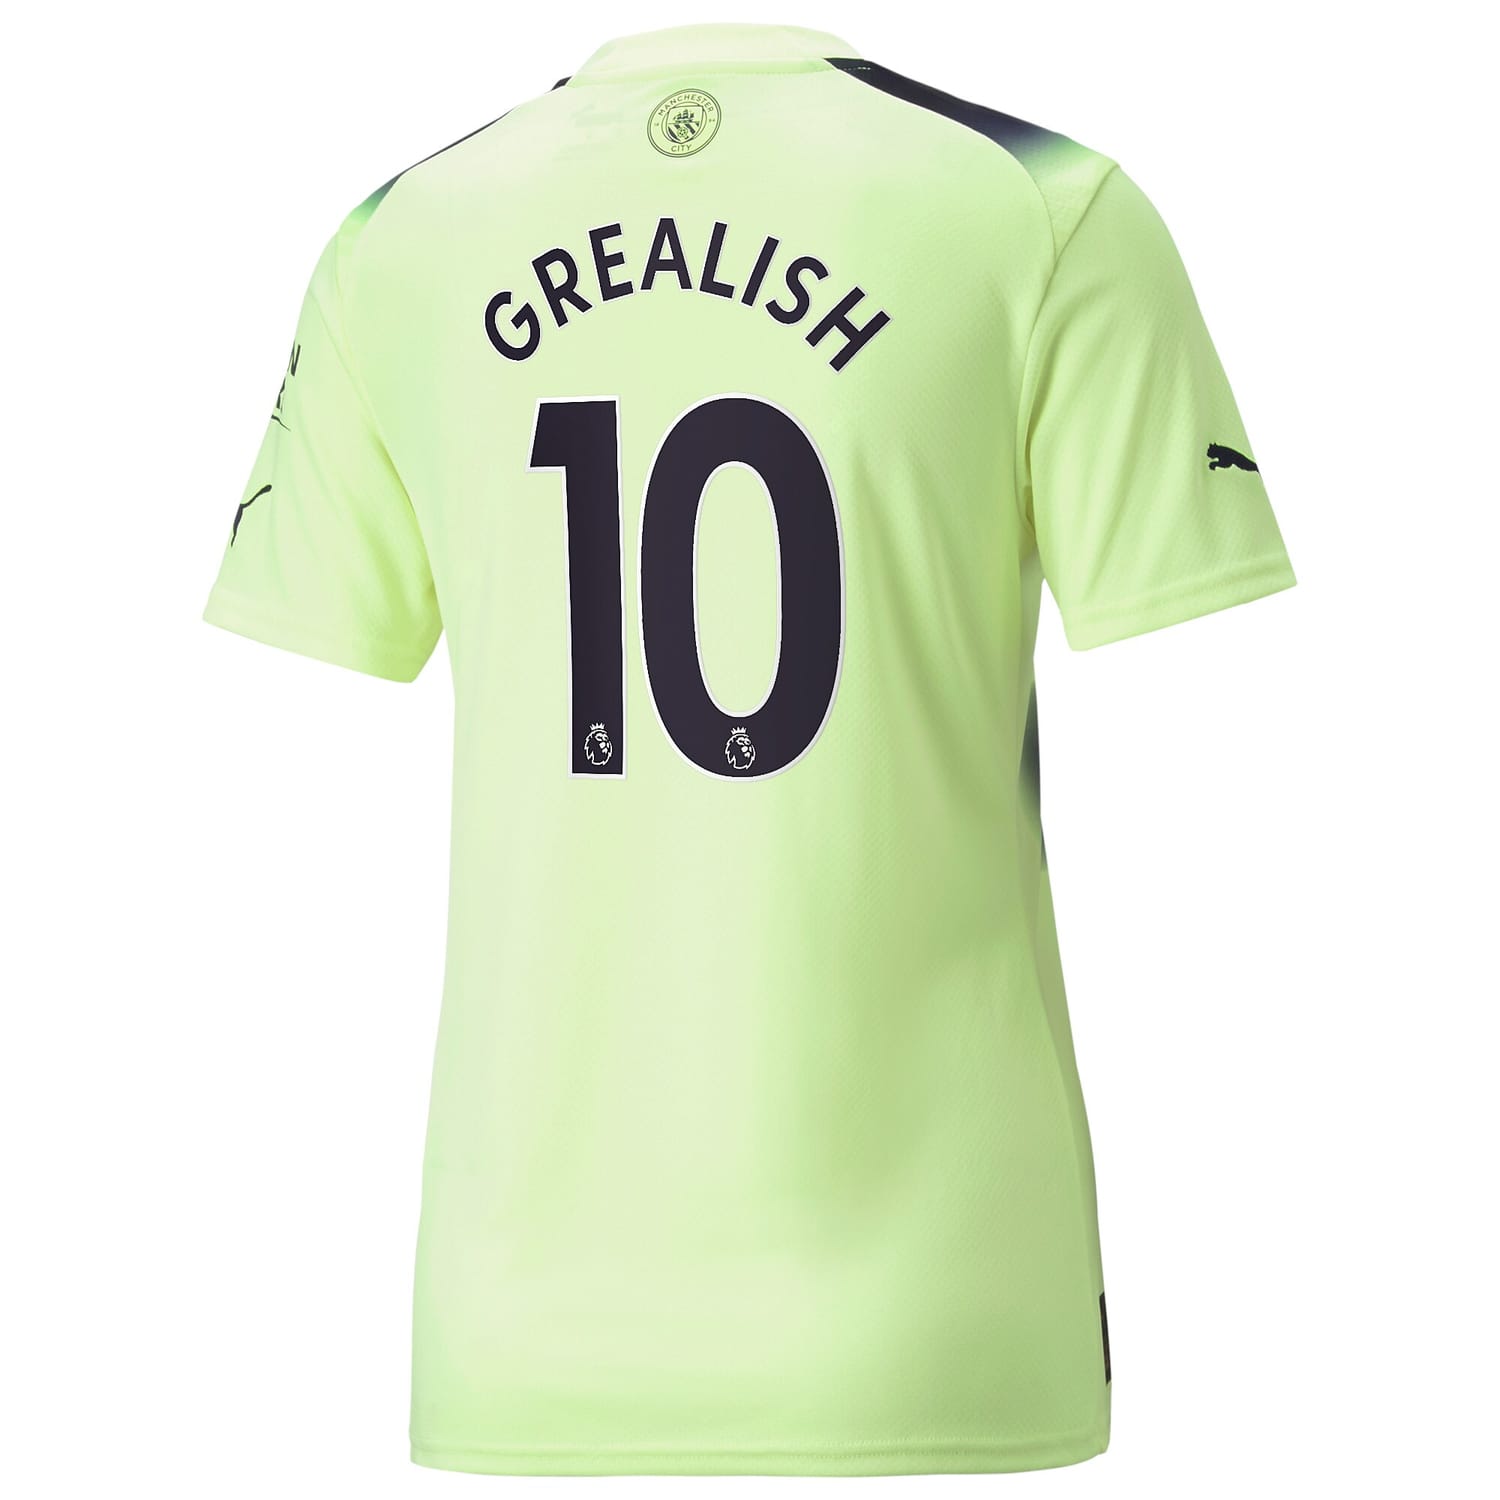 Premier League Manchester City Third Jersey Shirt 2022-23 player Jack Grealish 10 printing for Women